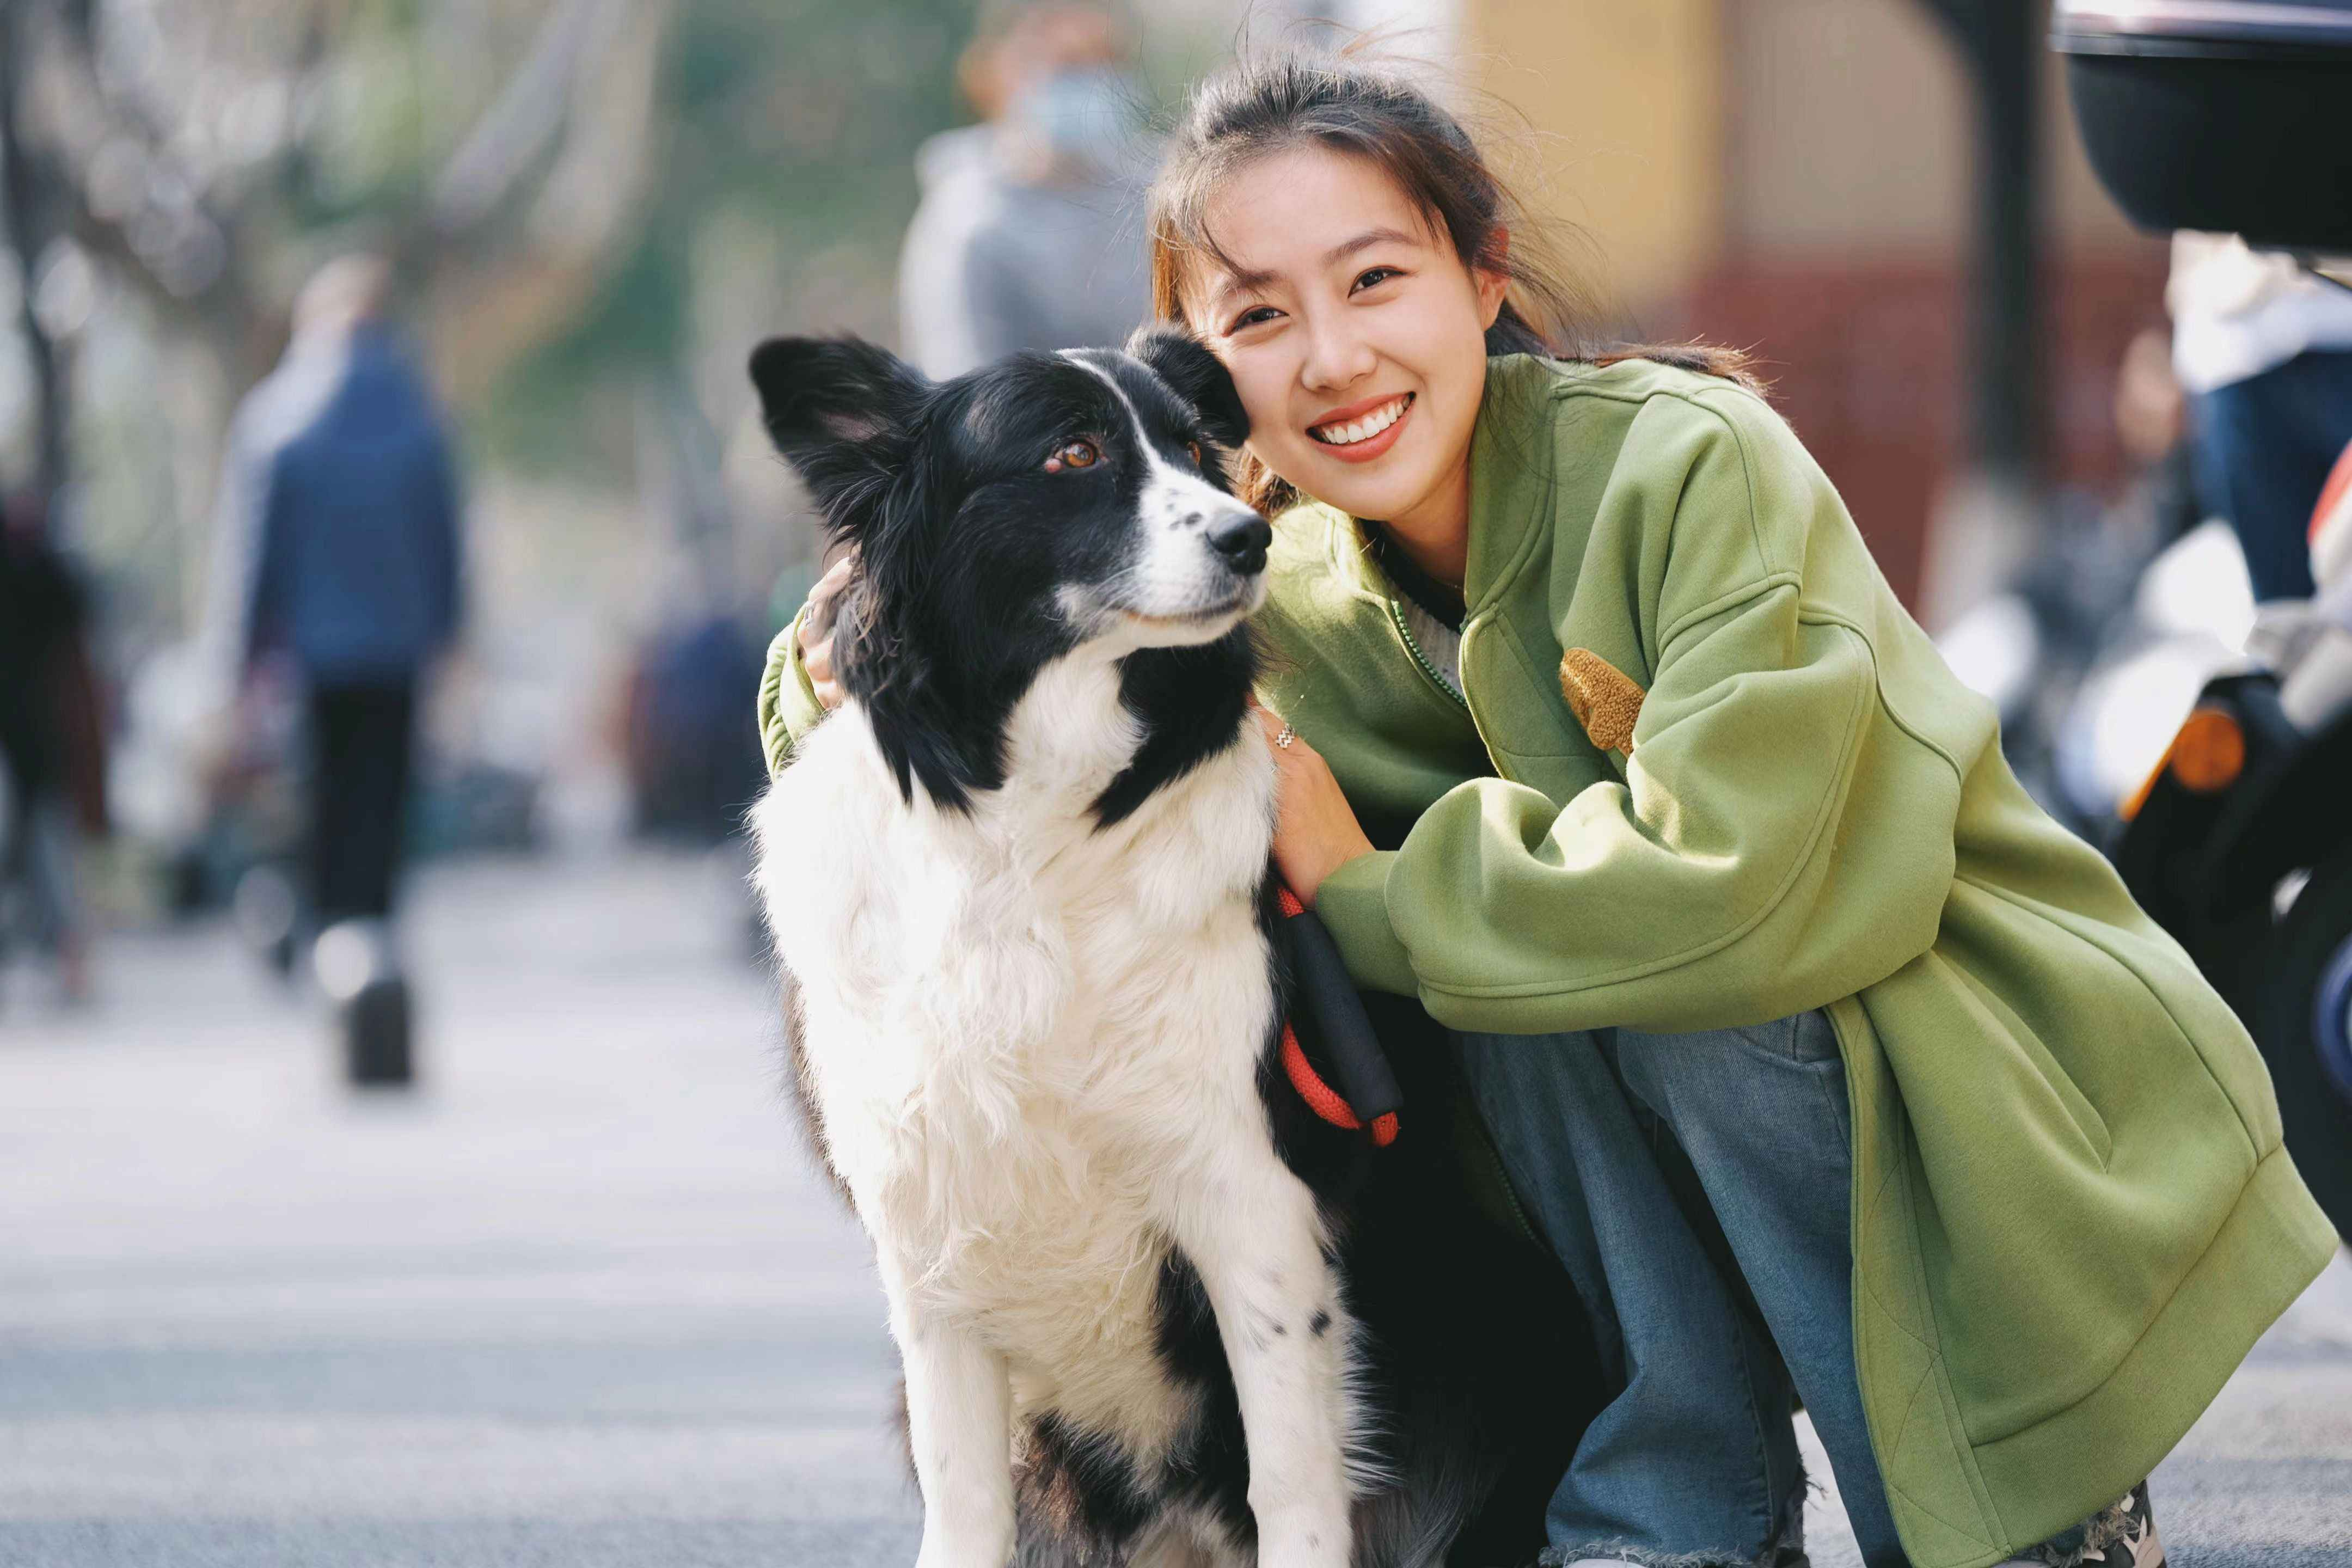 Keeping Up with a Border Collie: A Guide for Seniors Considering Adding a Furry Friend to Their Home